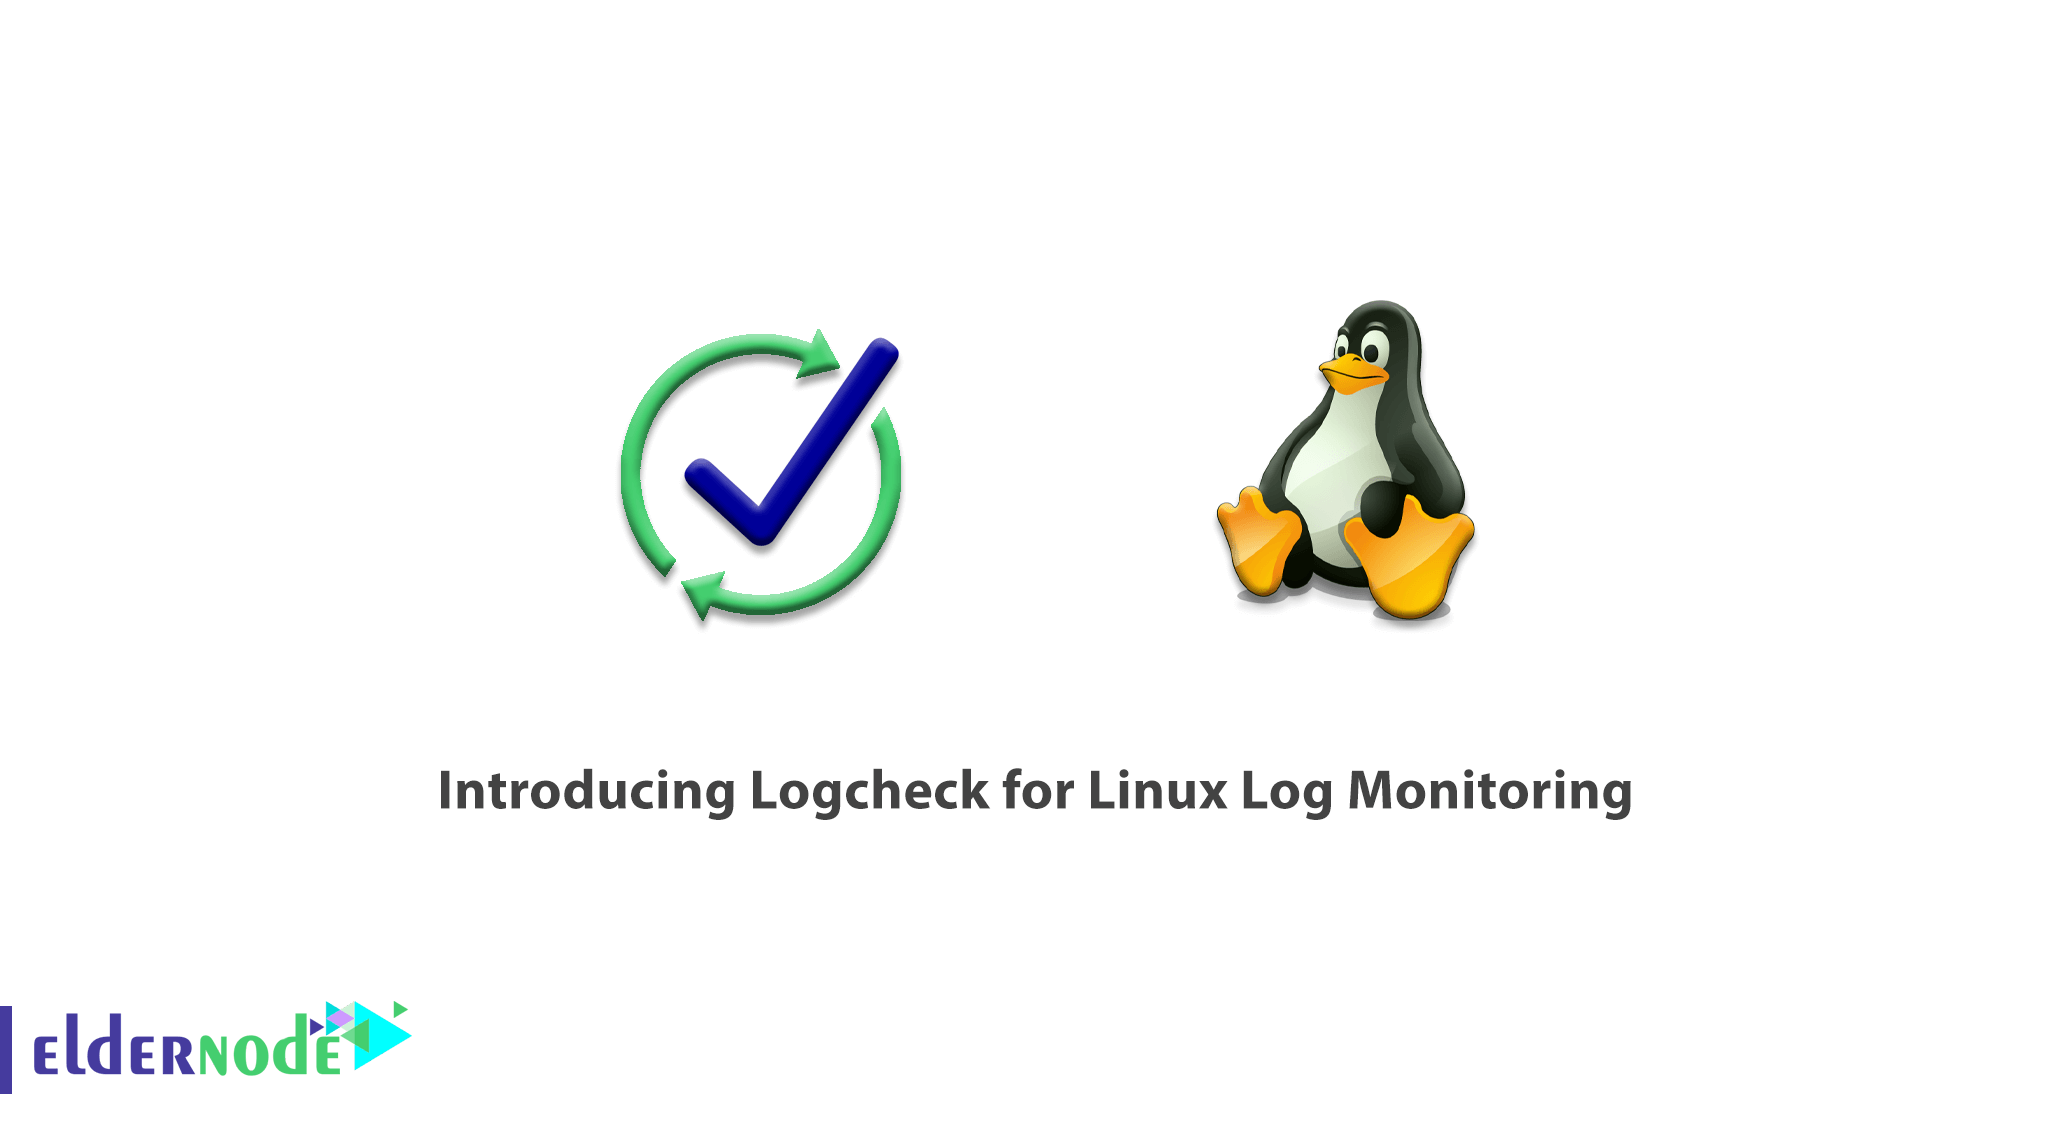 Introducing Logcheck for Linux Log Monitoring